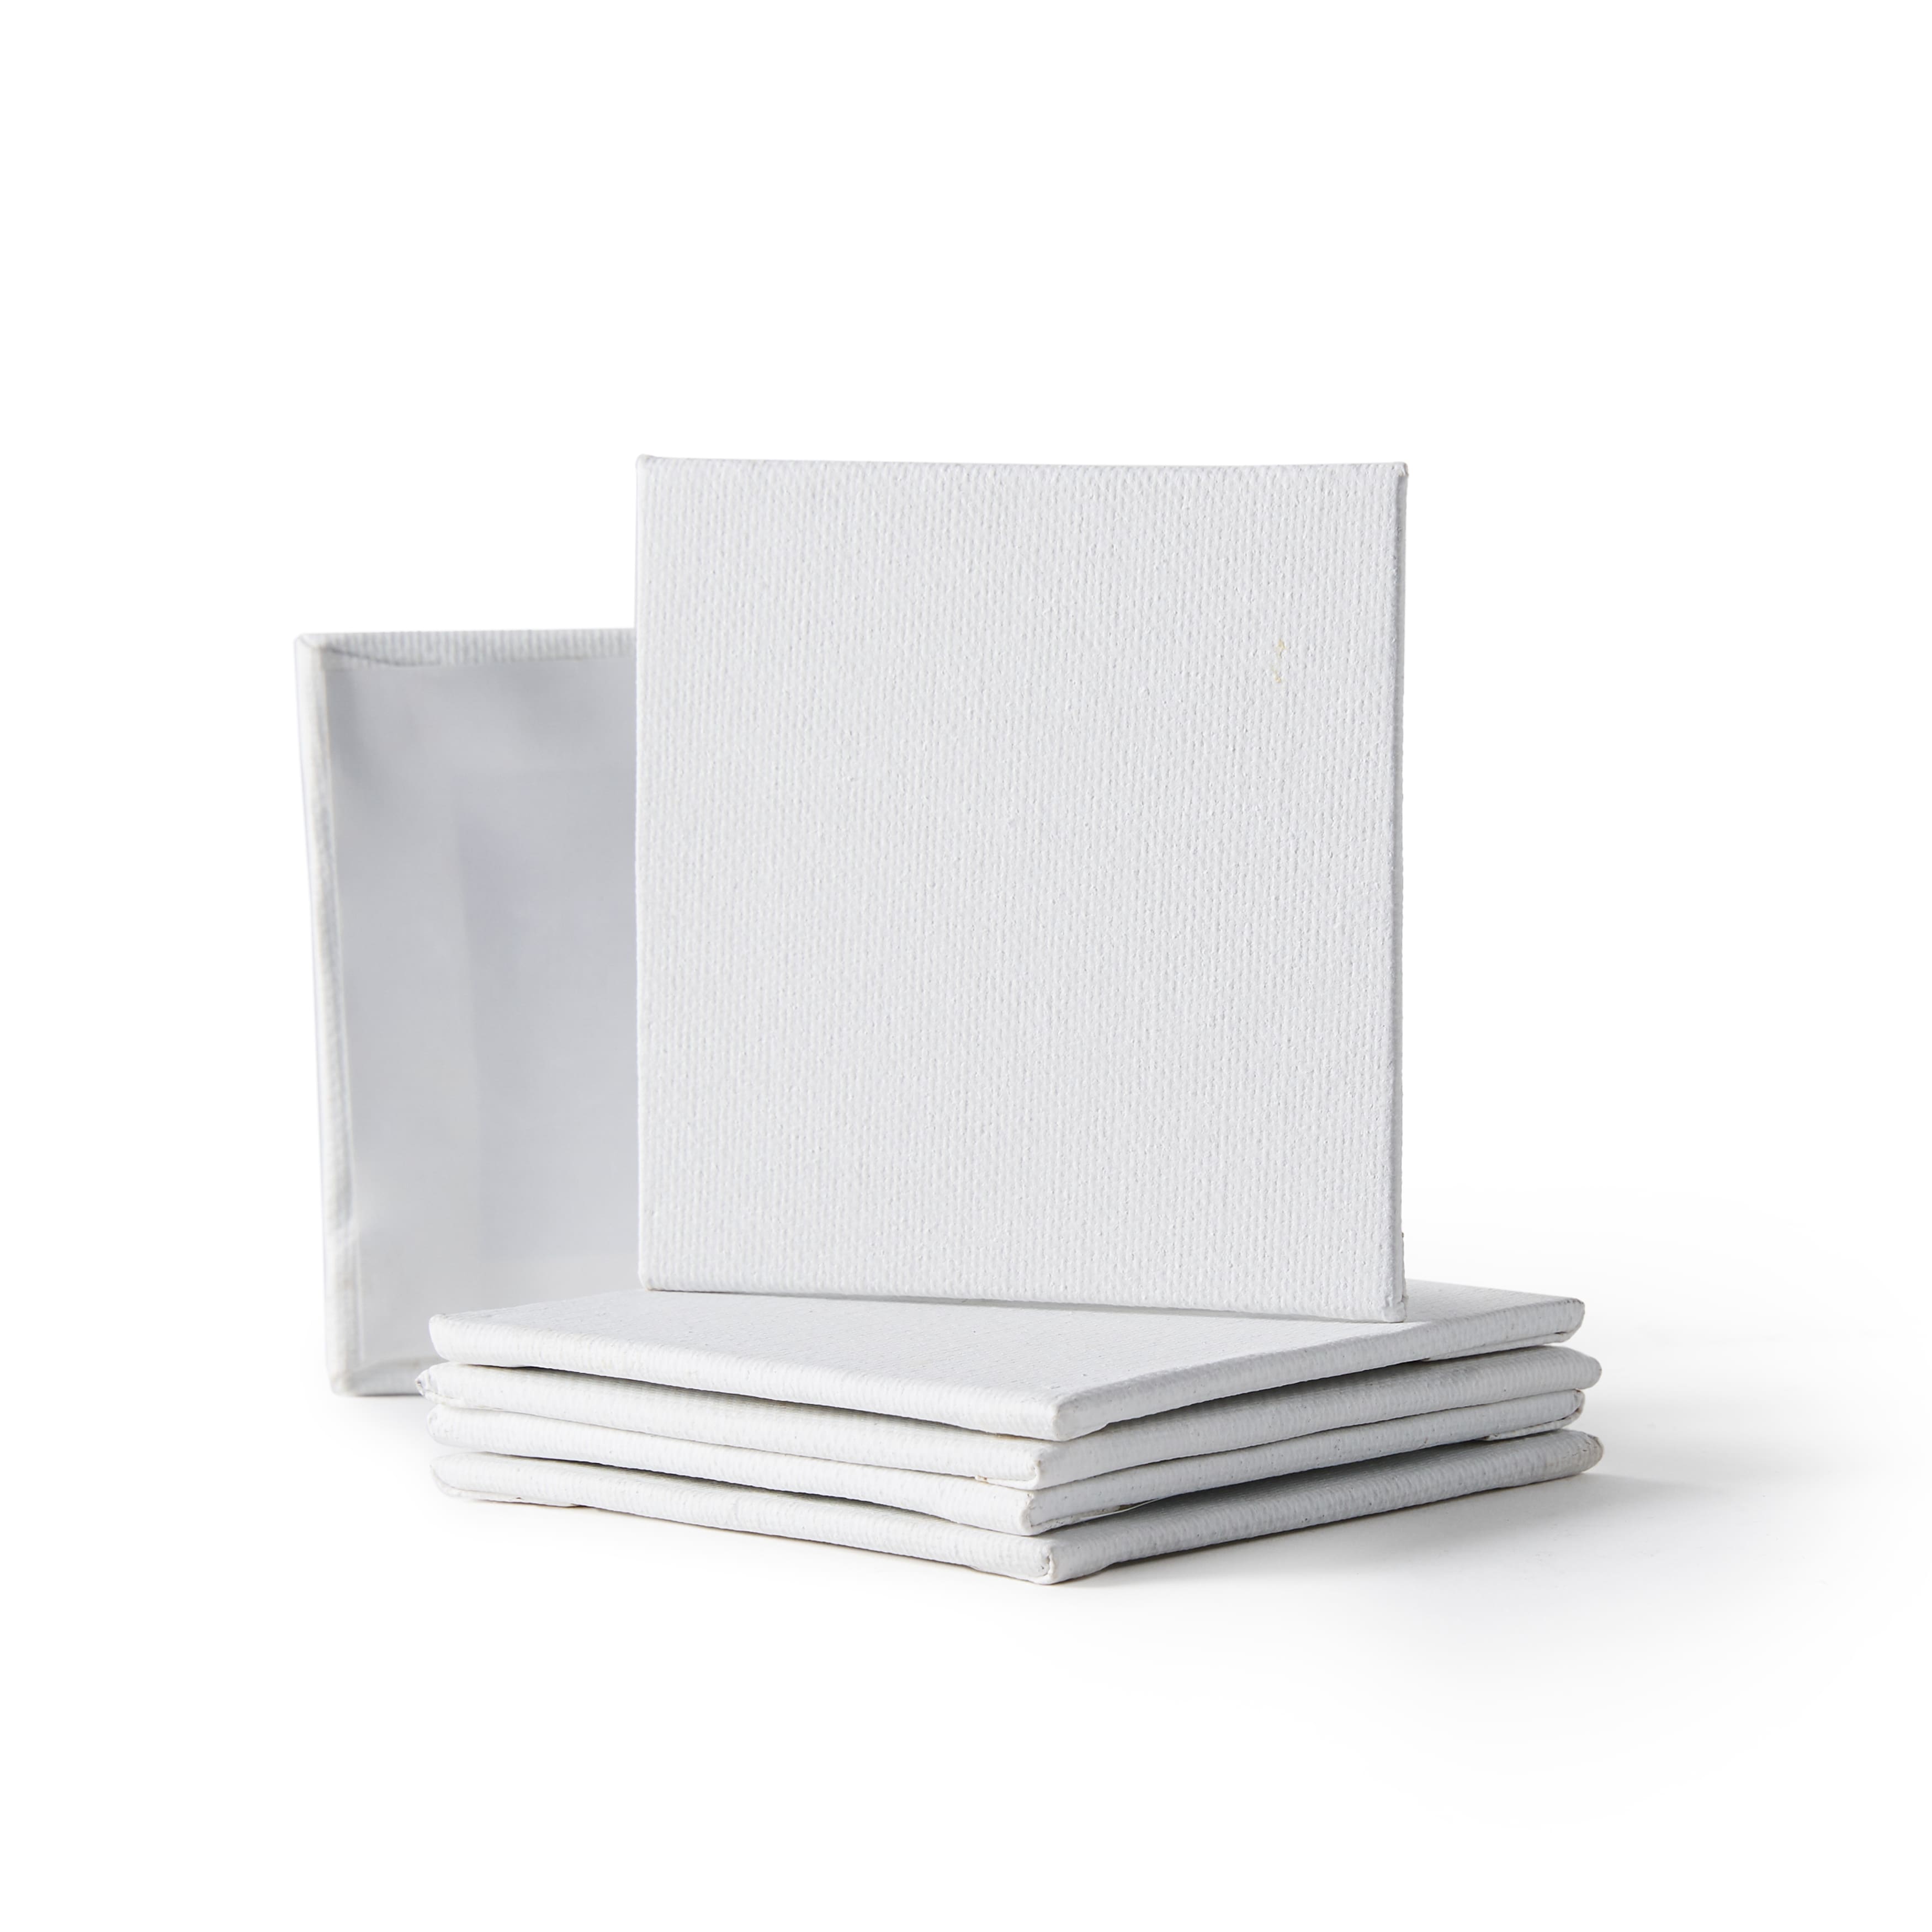 3X3 Inch Canvas Board (Pack of 12)